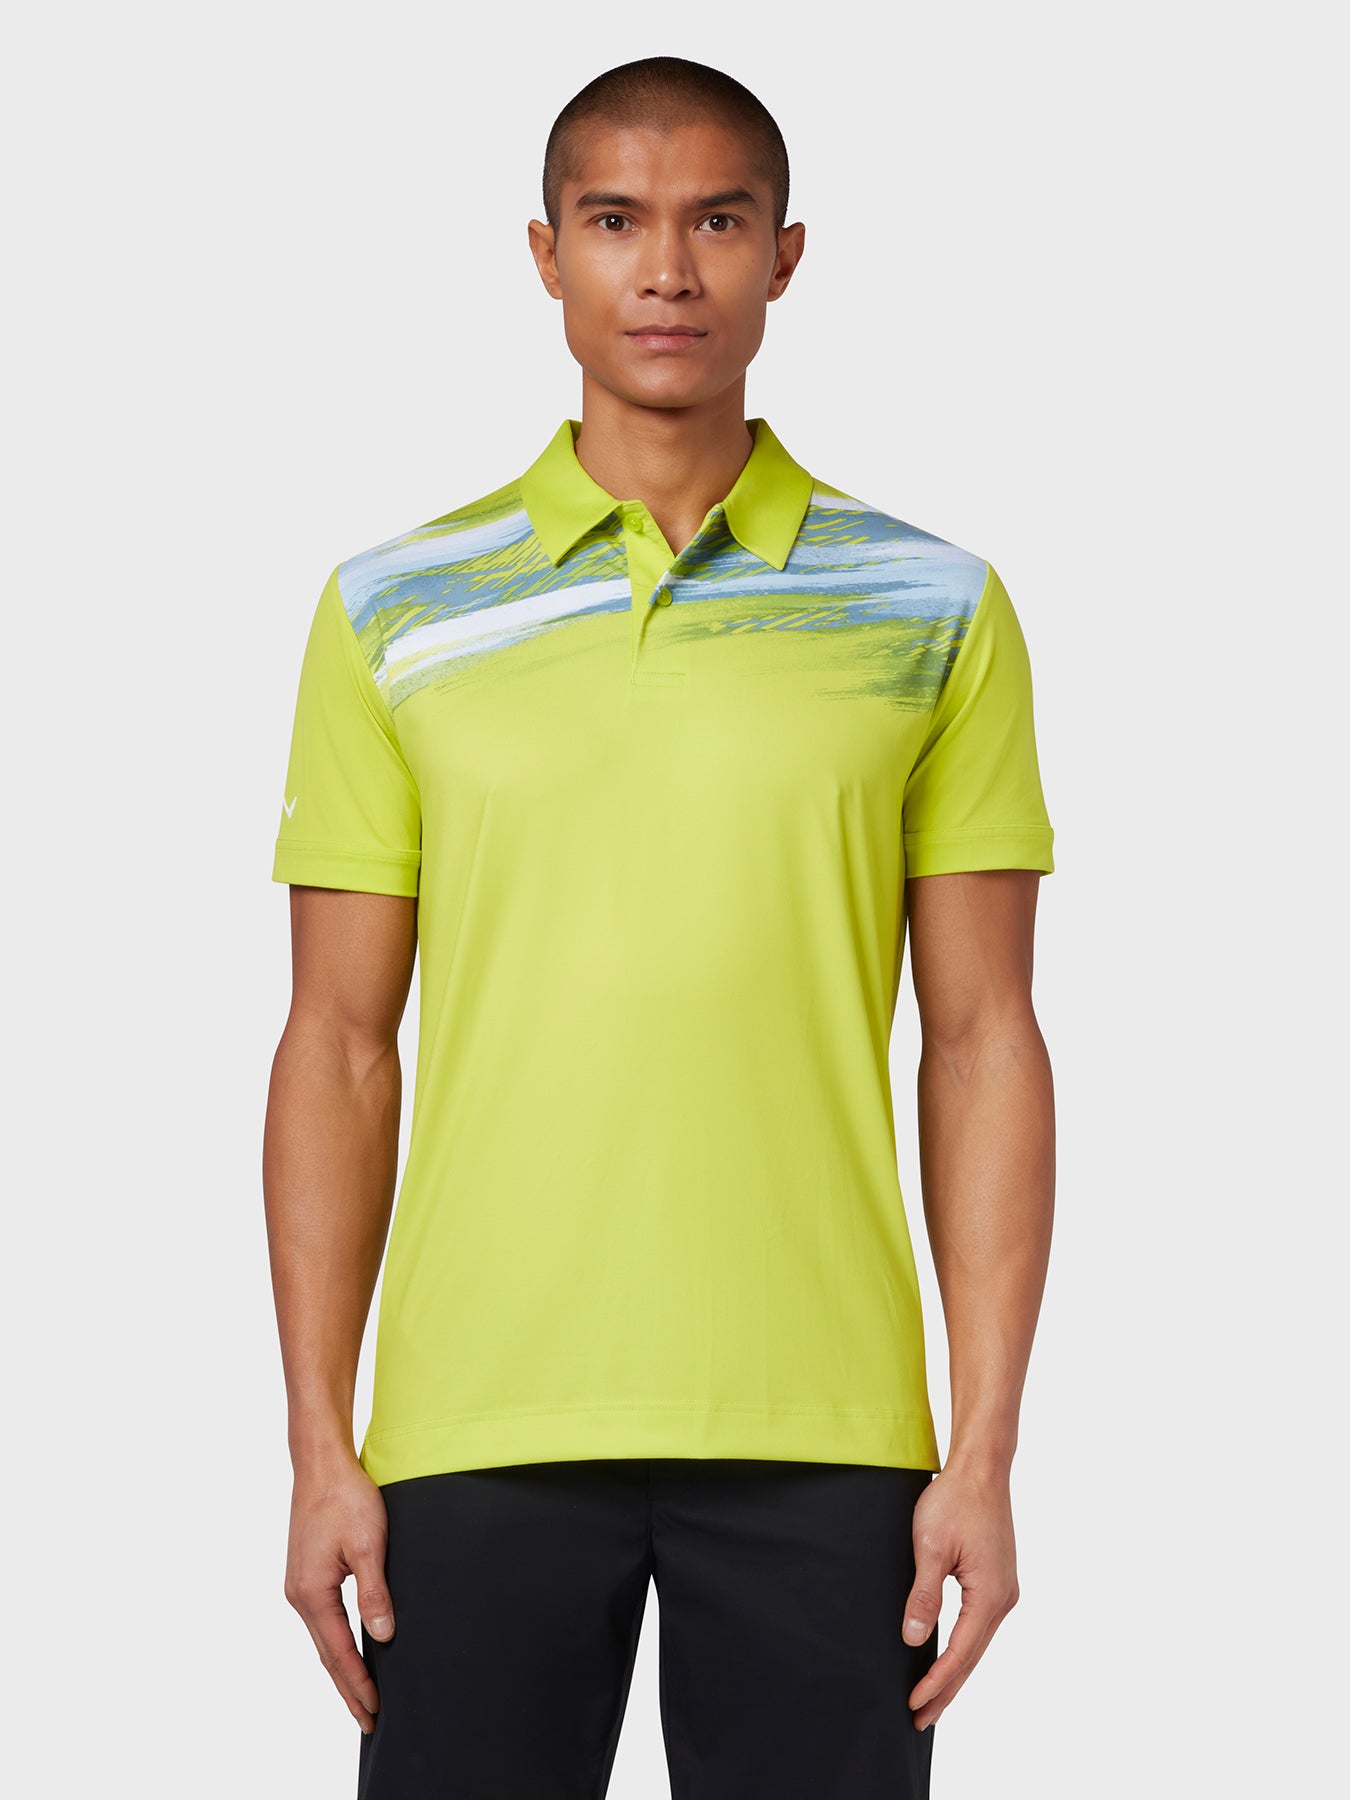 View X Series Active Textured Print Polo In Lime Punch Lime Punch XL information